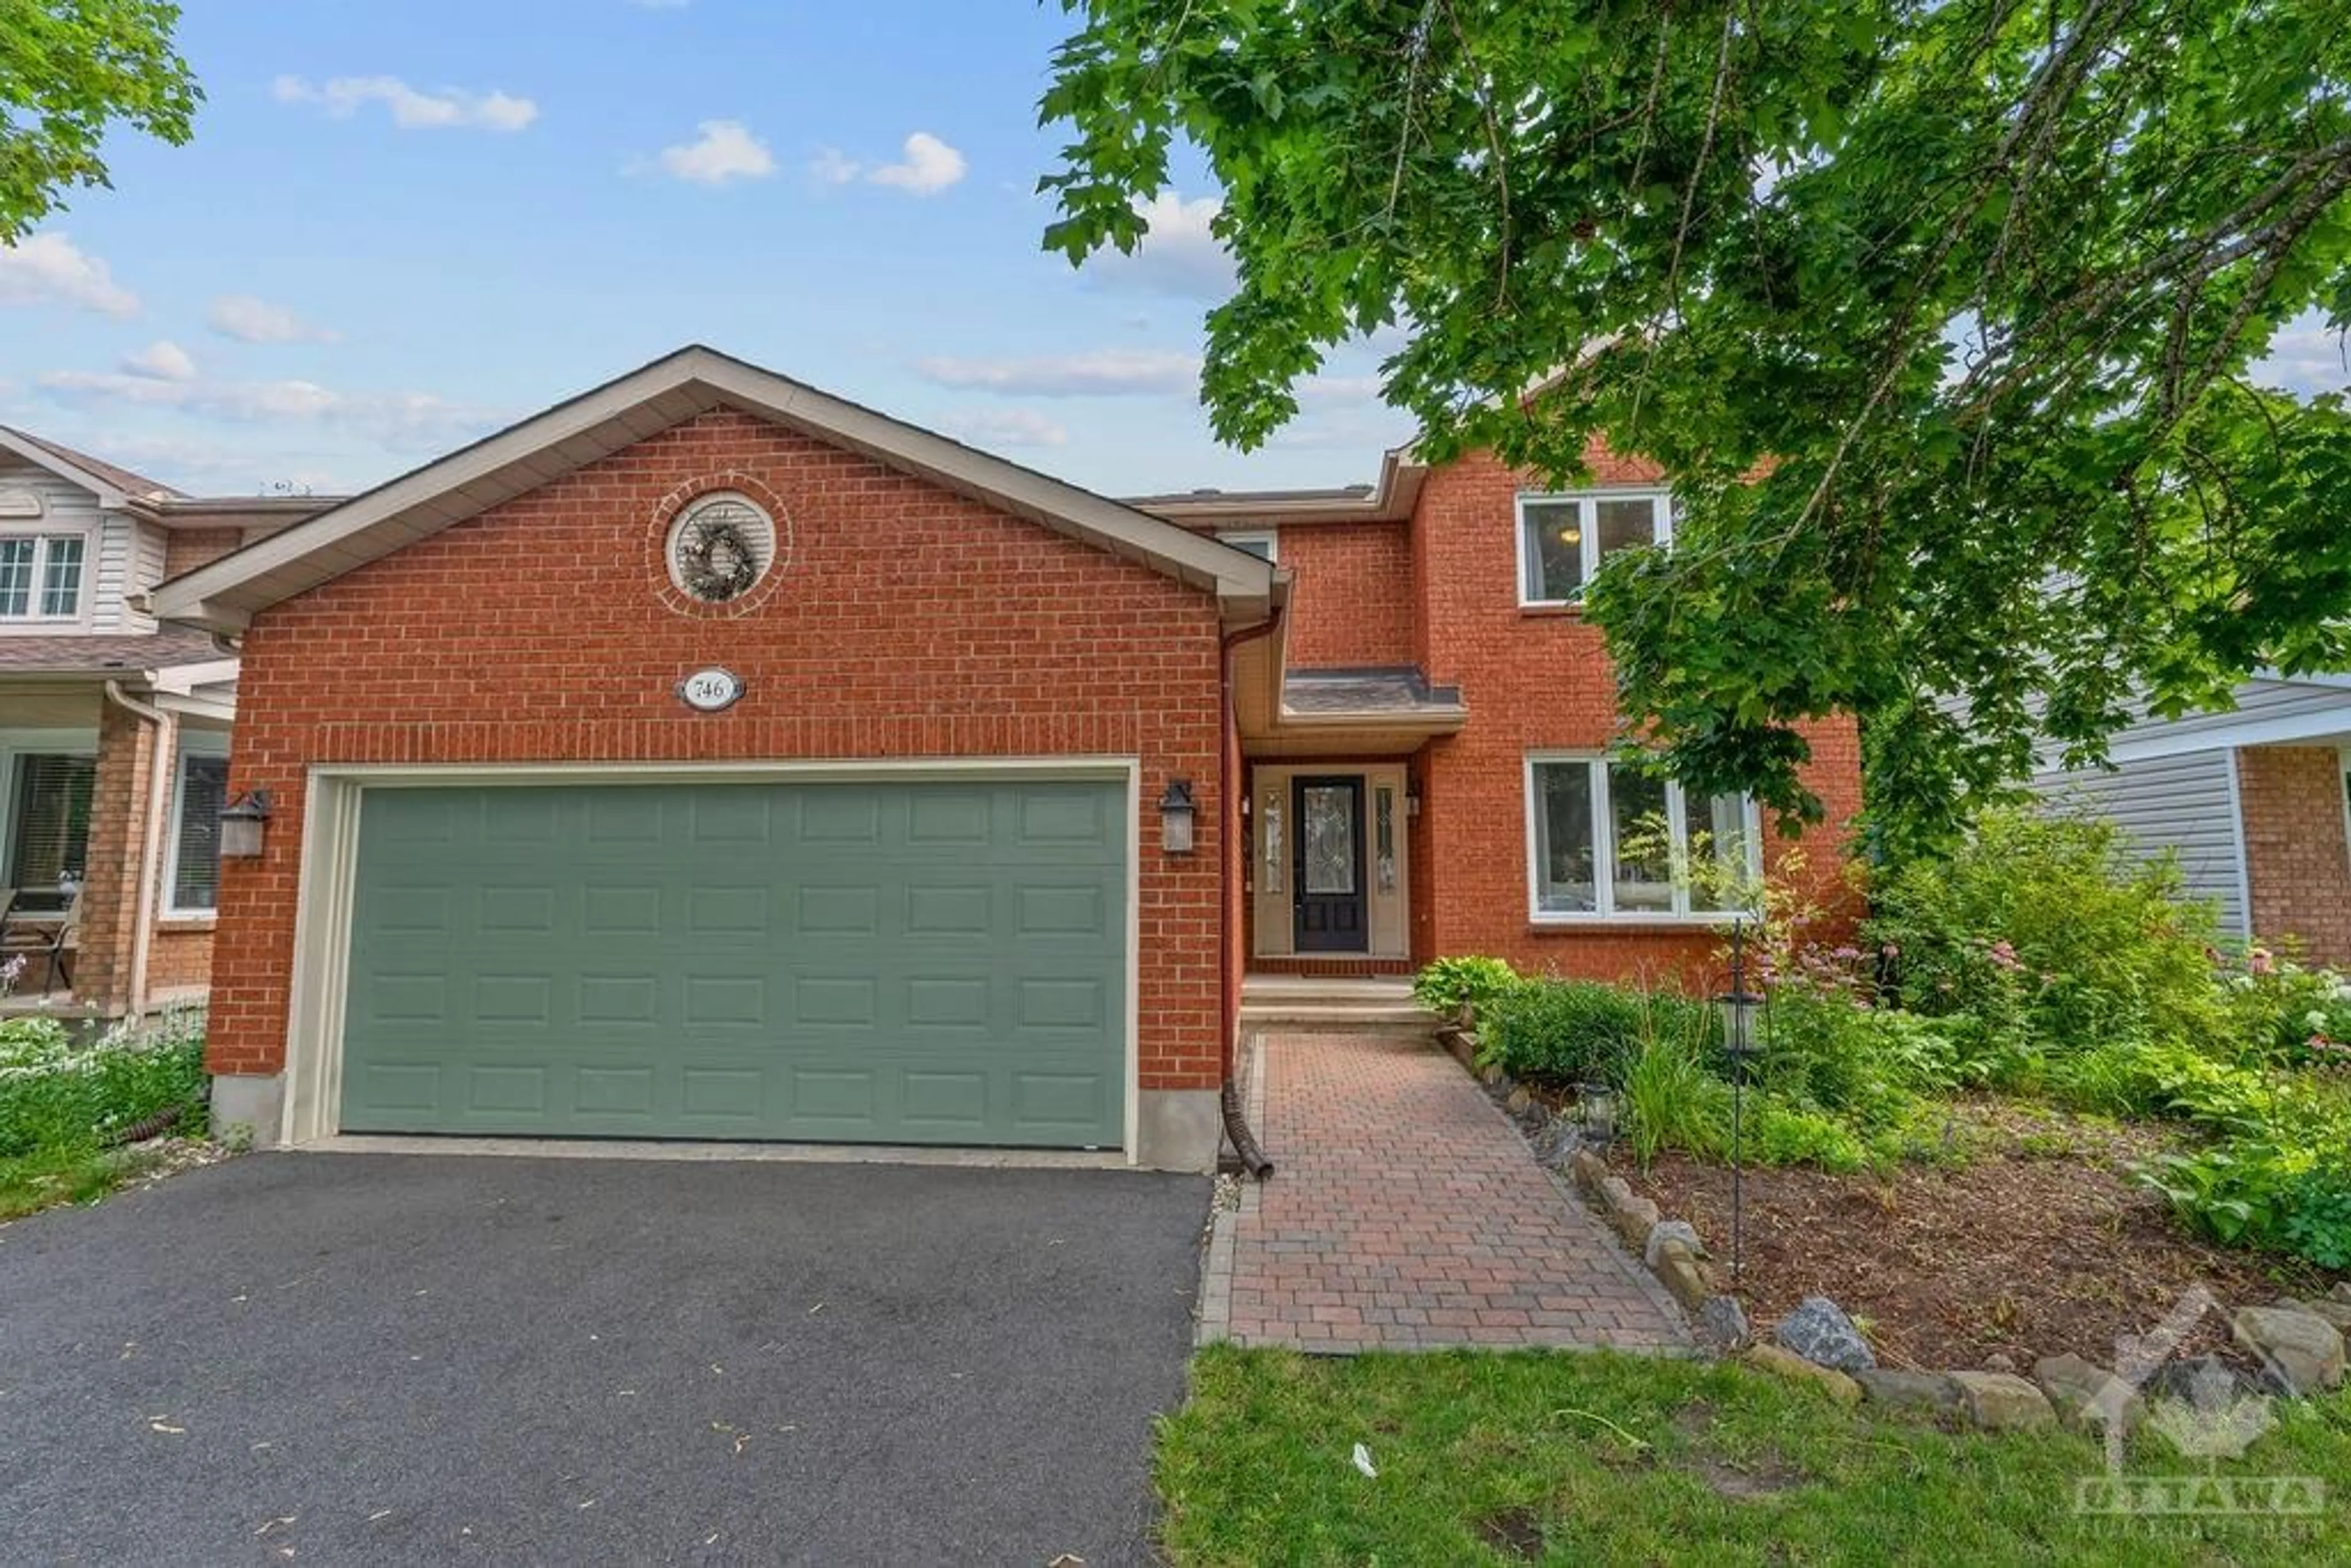 Home with brick exterior material for 746 MERKLEY Dr, Ottawa Ontario K4A 2T8